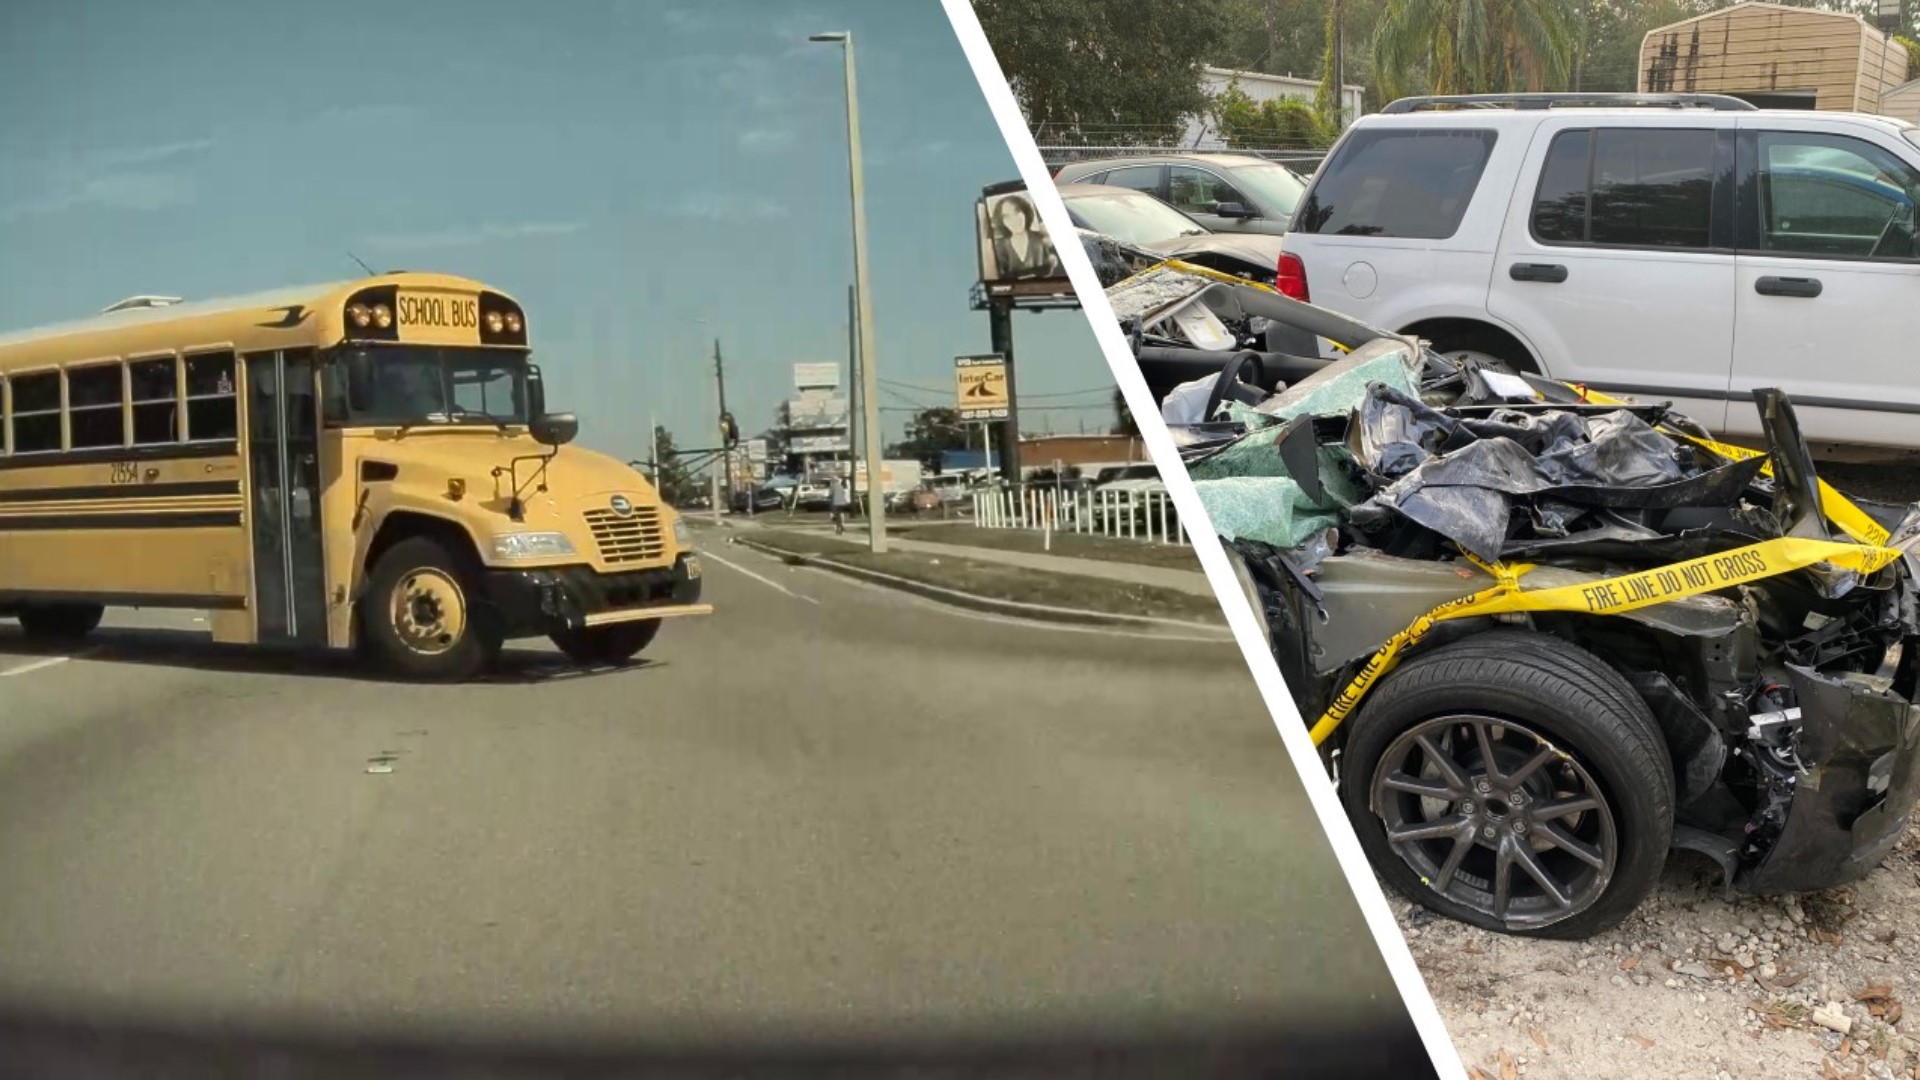 10 Investigates found some school bus drivers have multiple crashes on their record yet remain on the road, taking children to and from school.